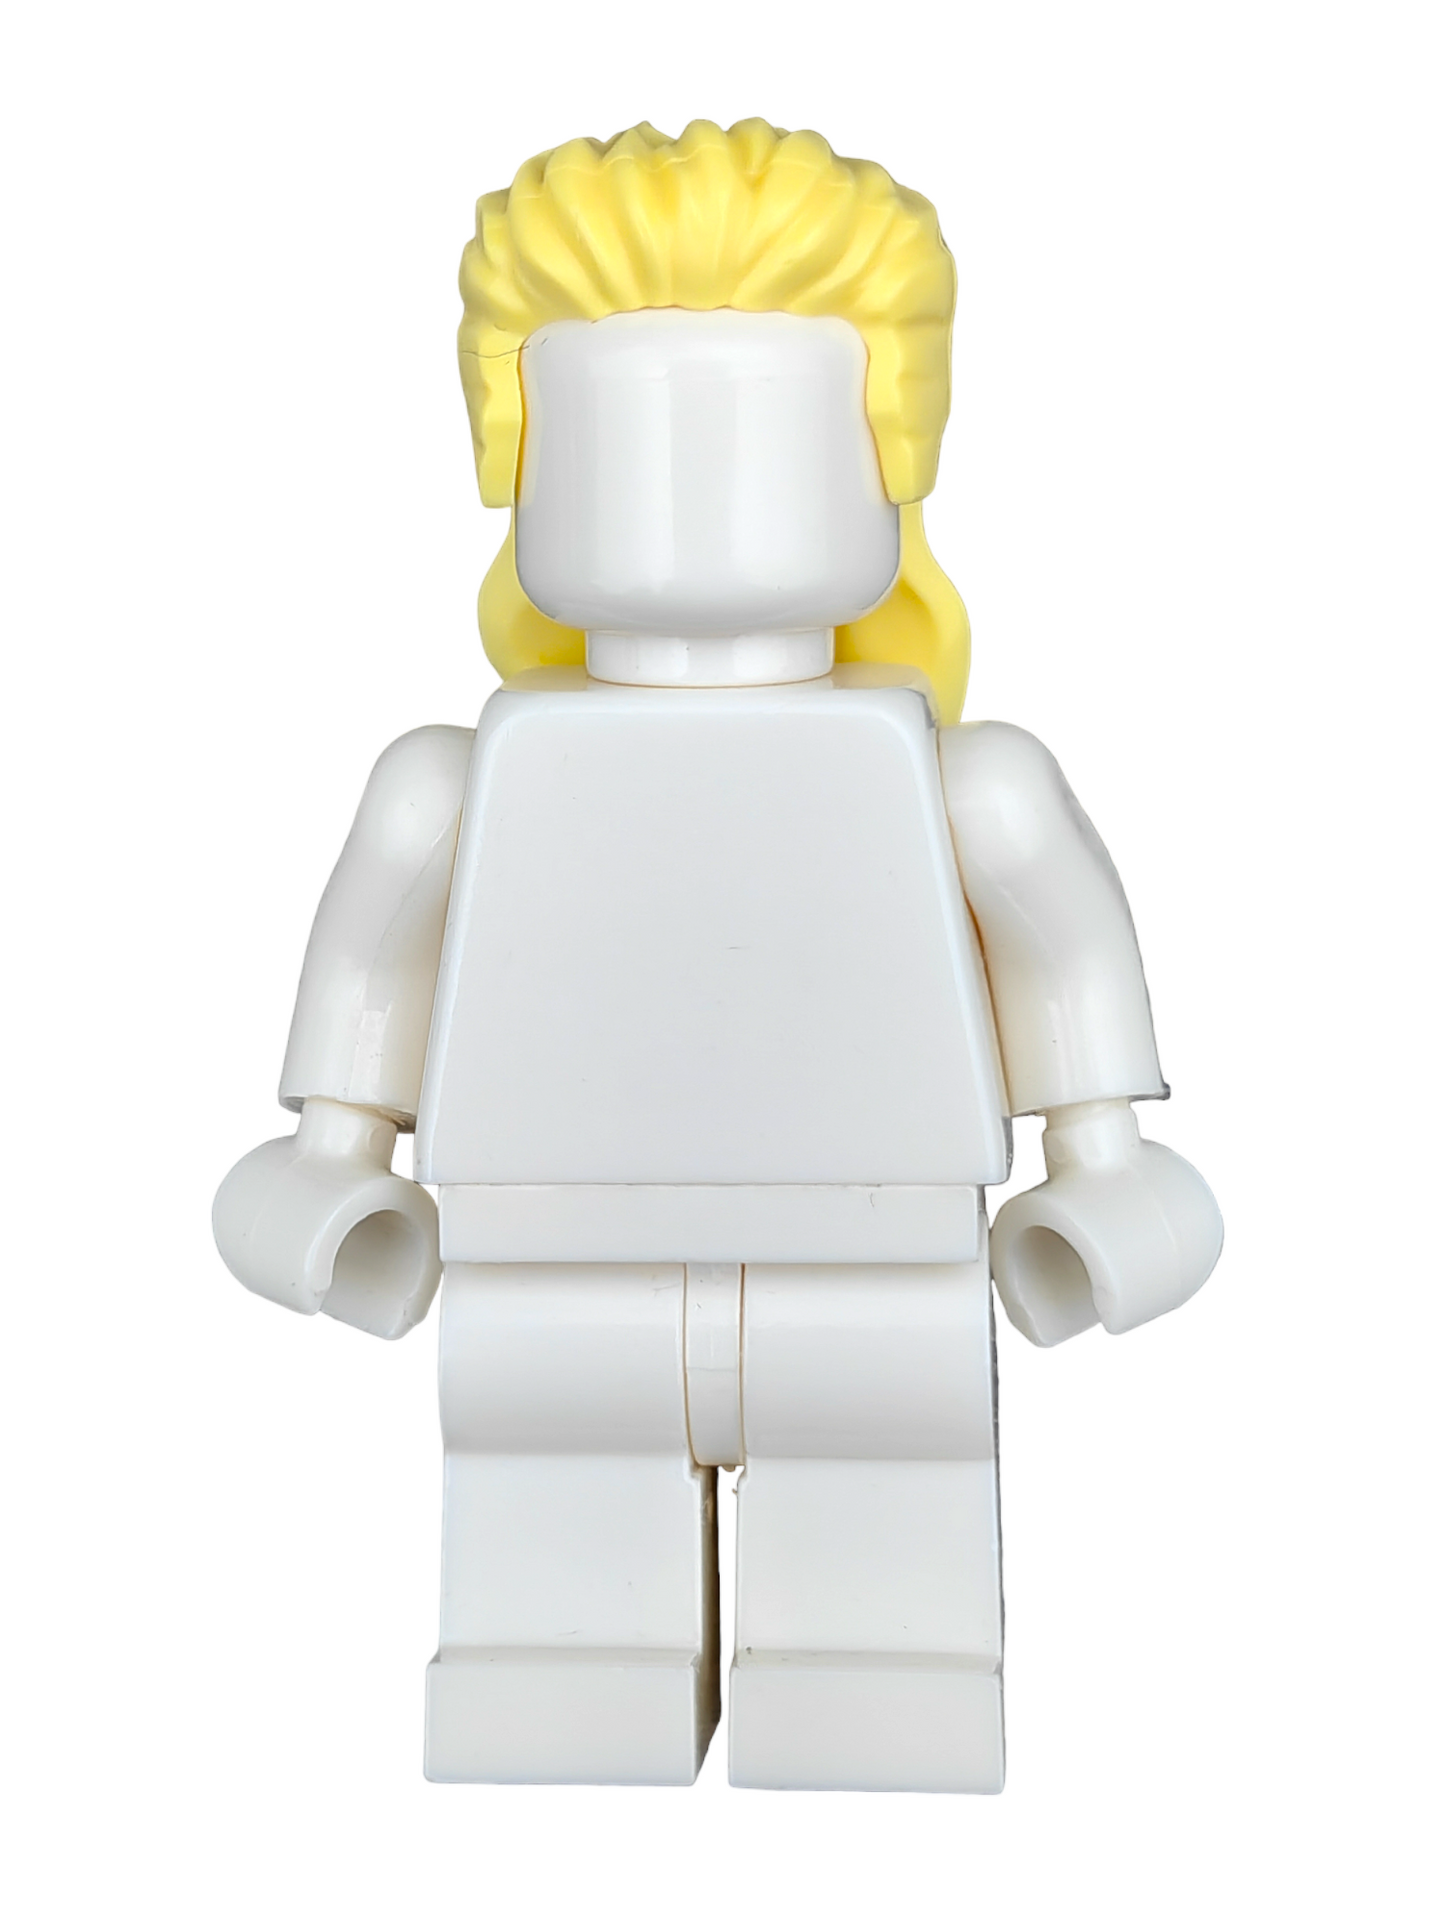 LEGO Wig, Yellow Hair Long Mullet Style - UB1254